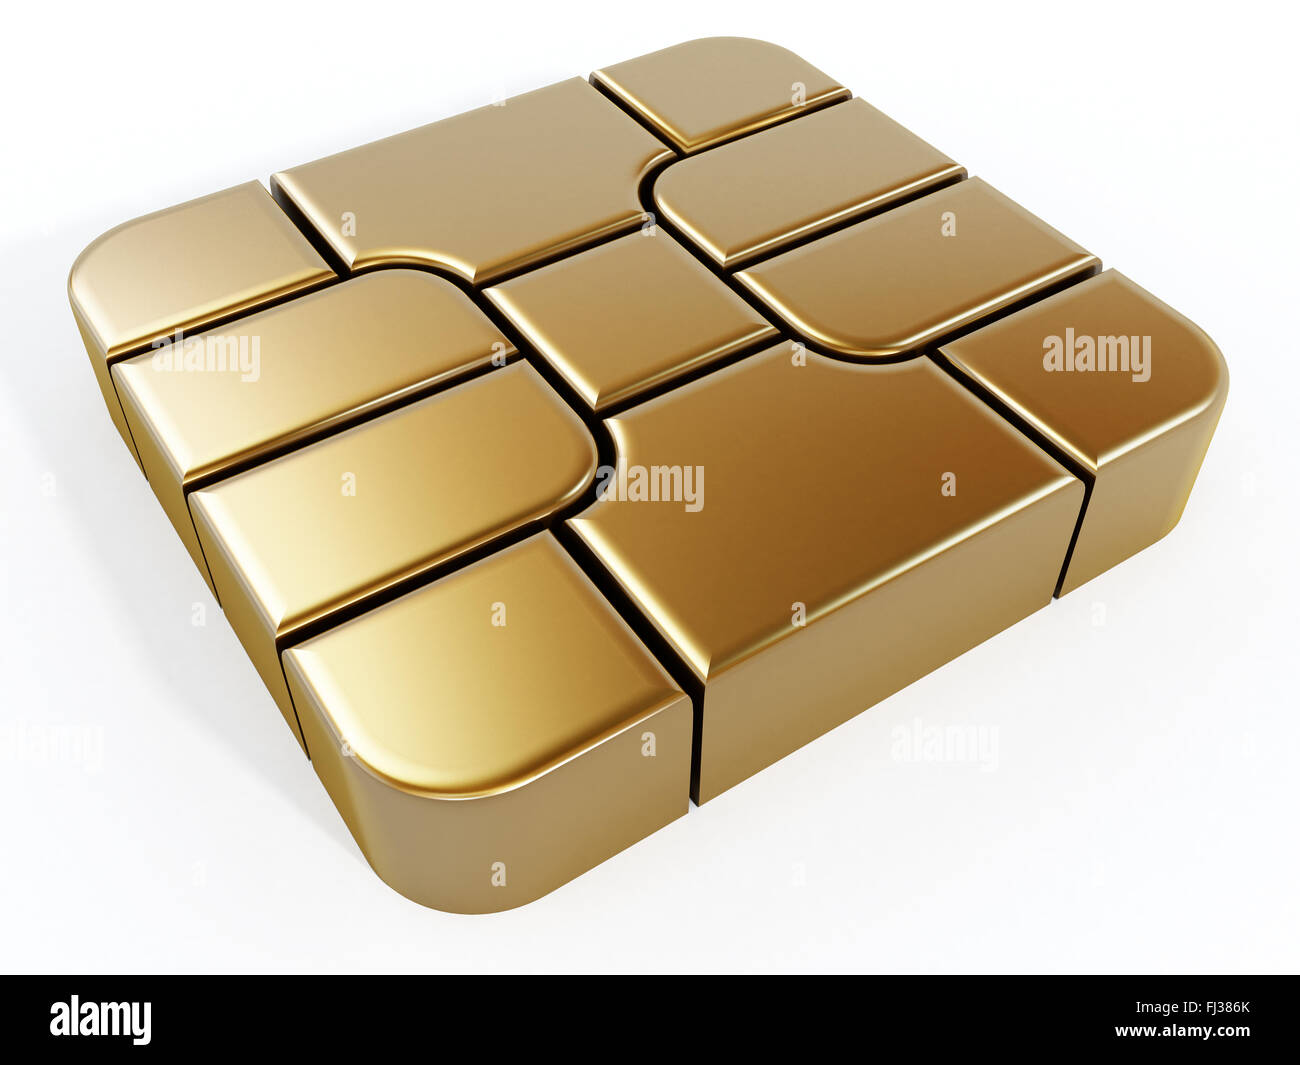 Gold sim card chip isolated on white background Stock Photo - Alamy